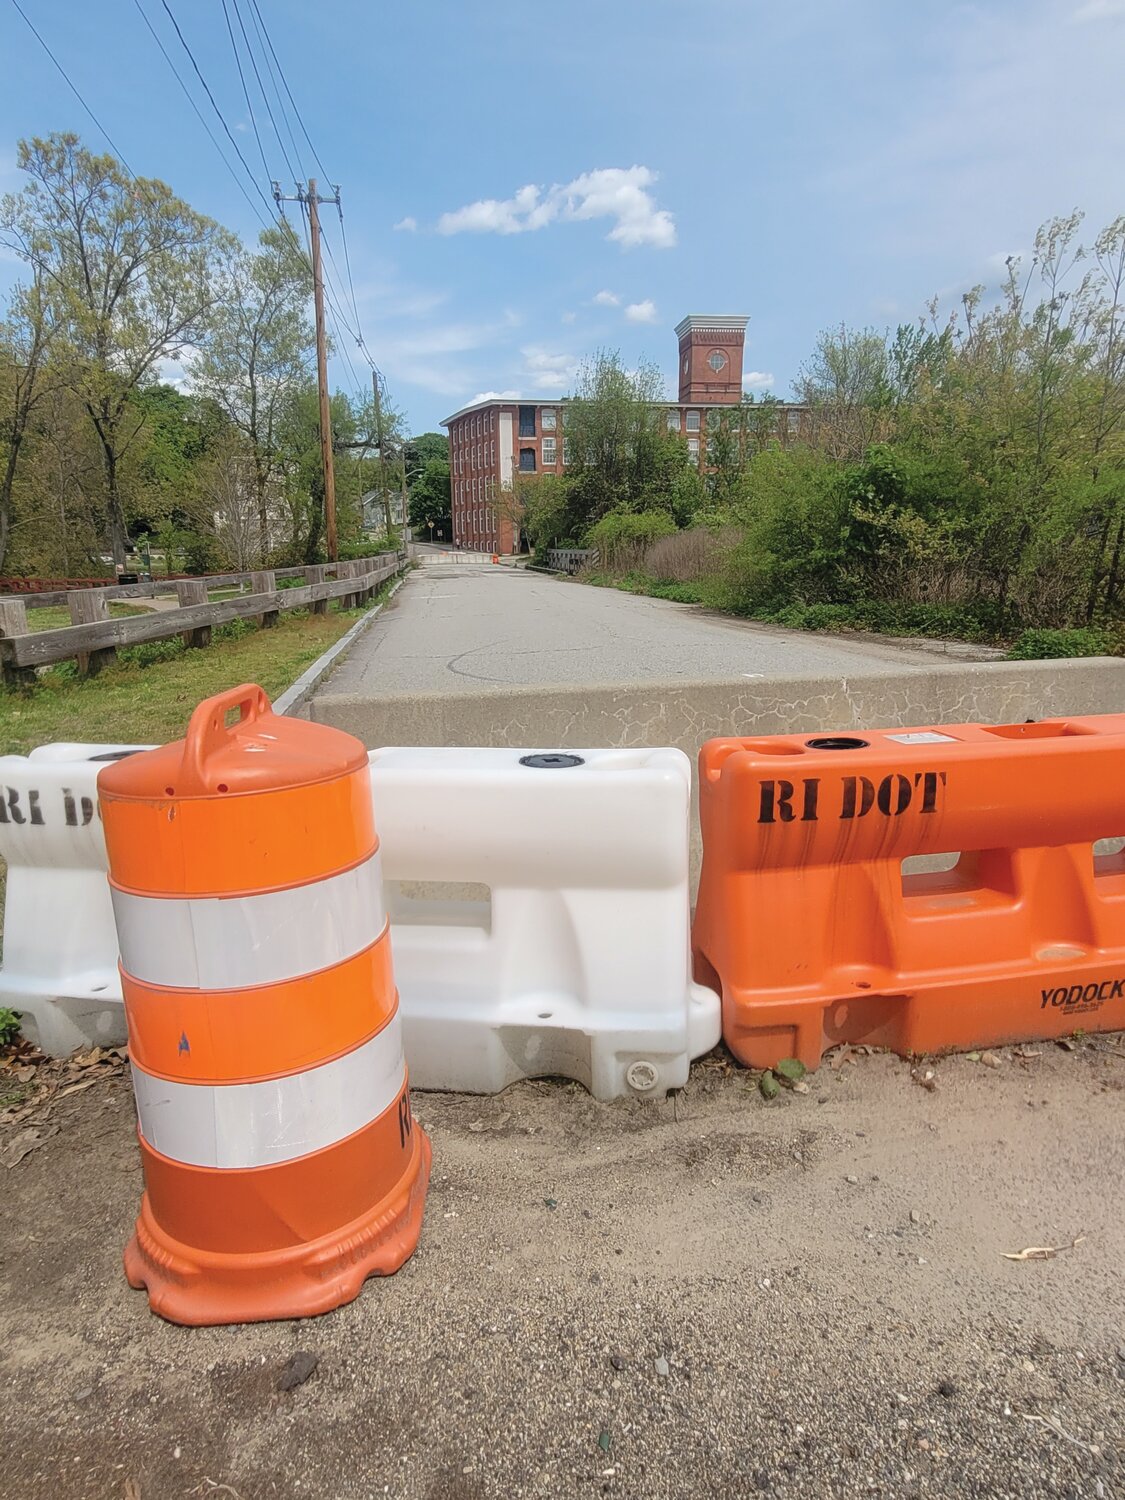 GO BACK THE WAY YOU CAME: Orange barricades, erected by RI DOT, block both sides of the Greystone Sluiceway Bridge on the border of Johnston and North Providence.